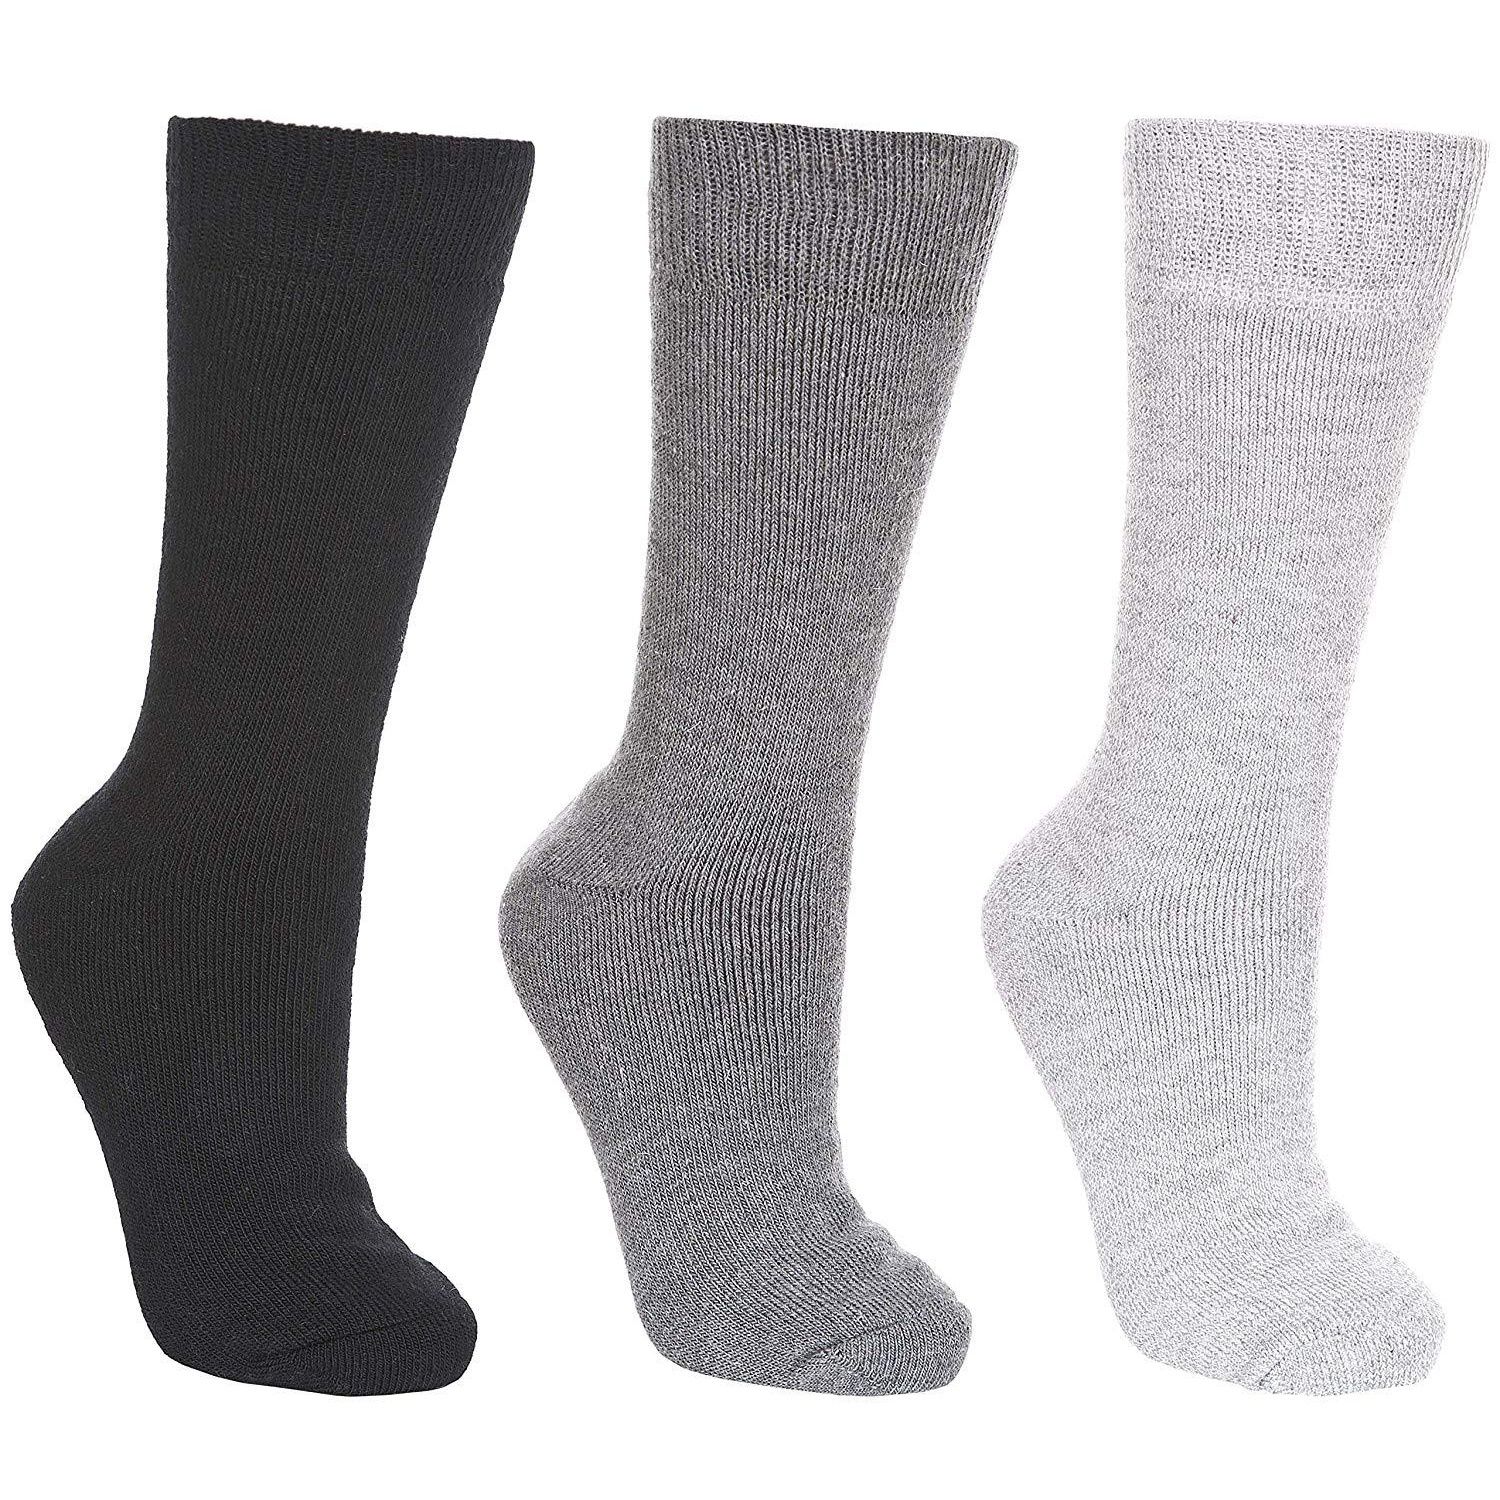 Mens casual socks. 3 pairs per pack. Choice of 2 colour packs. Choice of 2 sizes: UK 4-7 or UK 7-11. 80% Acrylic, 20% Polyester.